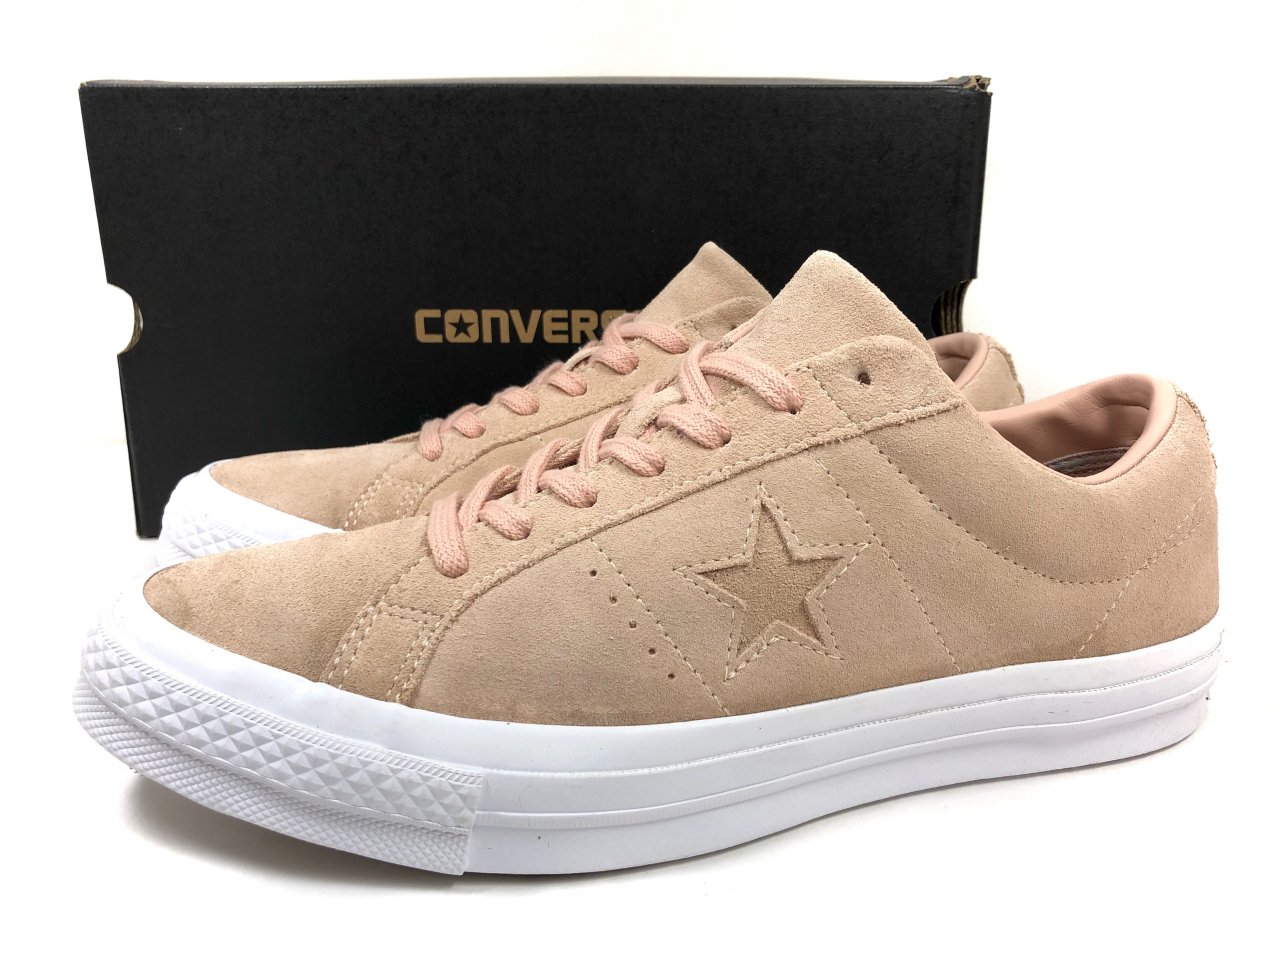 US企画 CONVERSE CONS ONE STAR OX DUST PINK SUEDE US8.5/27.0cm ...